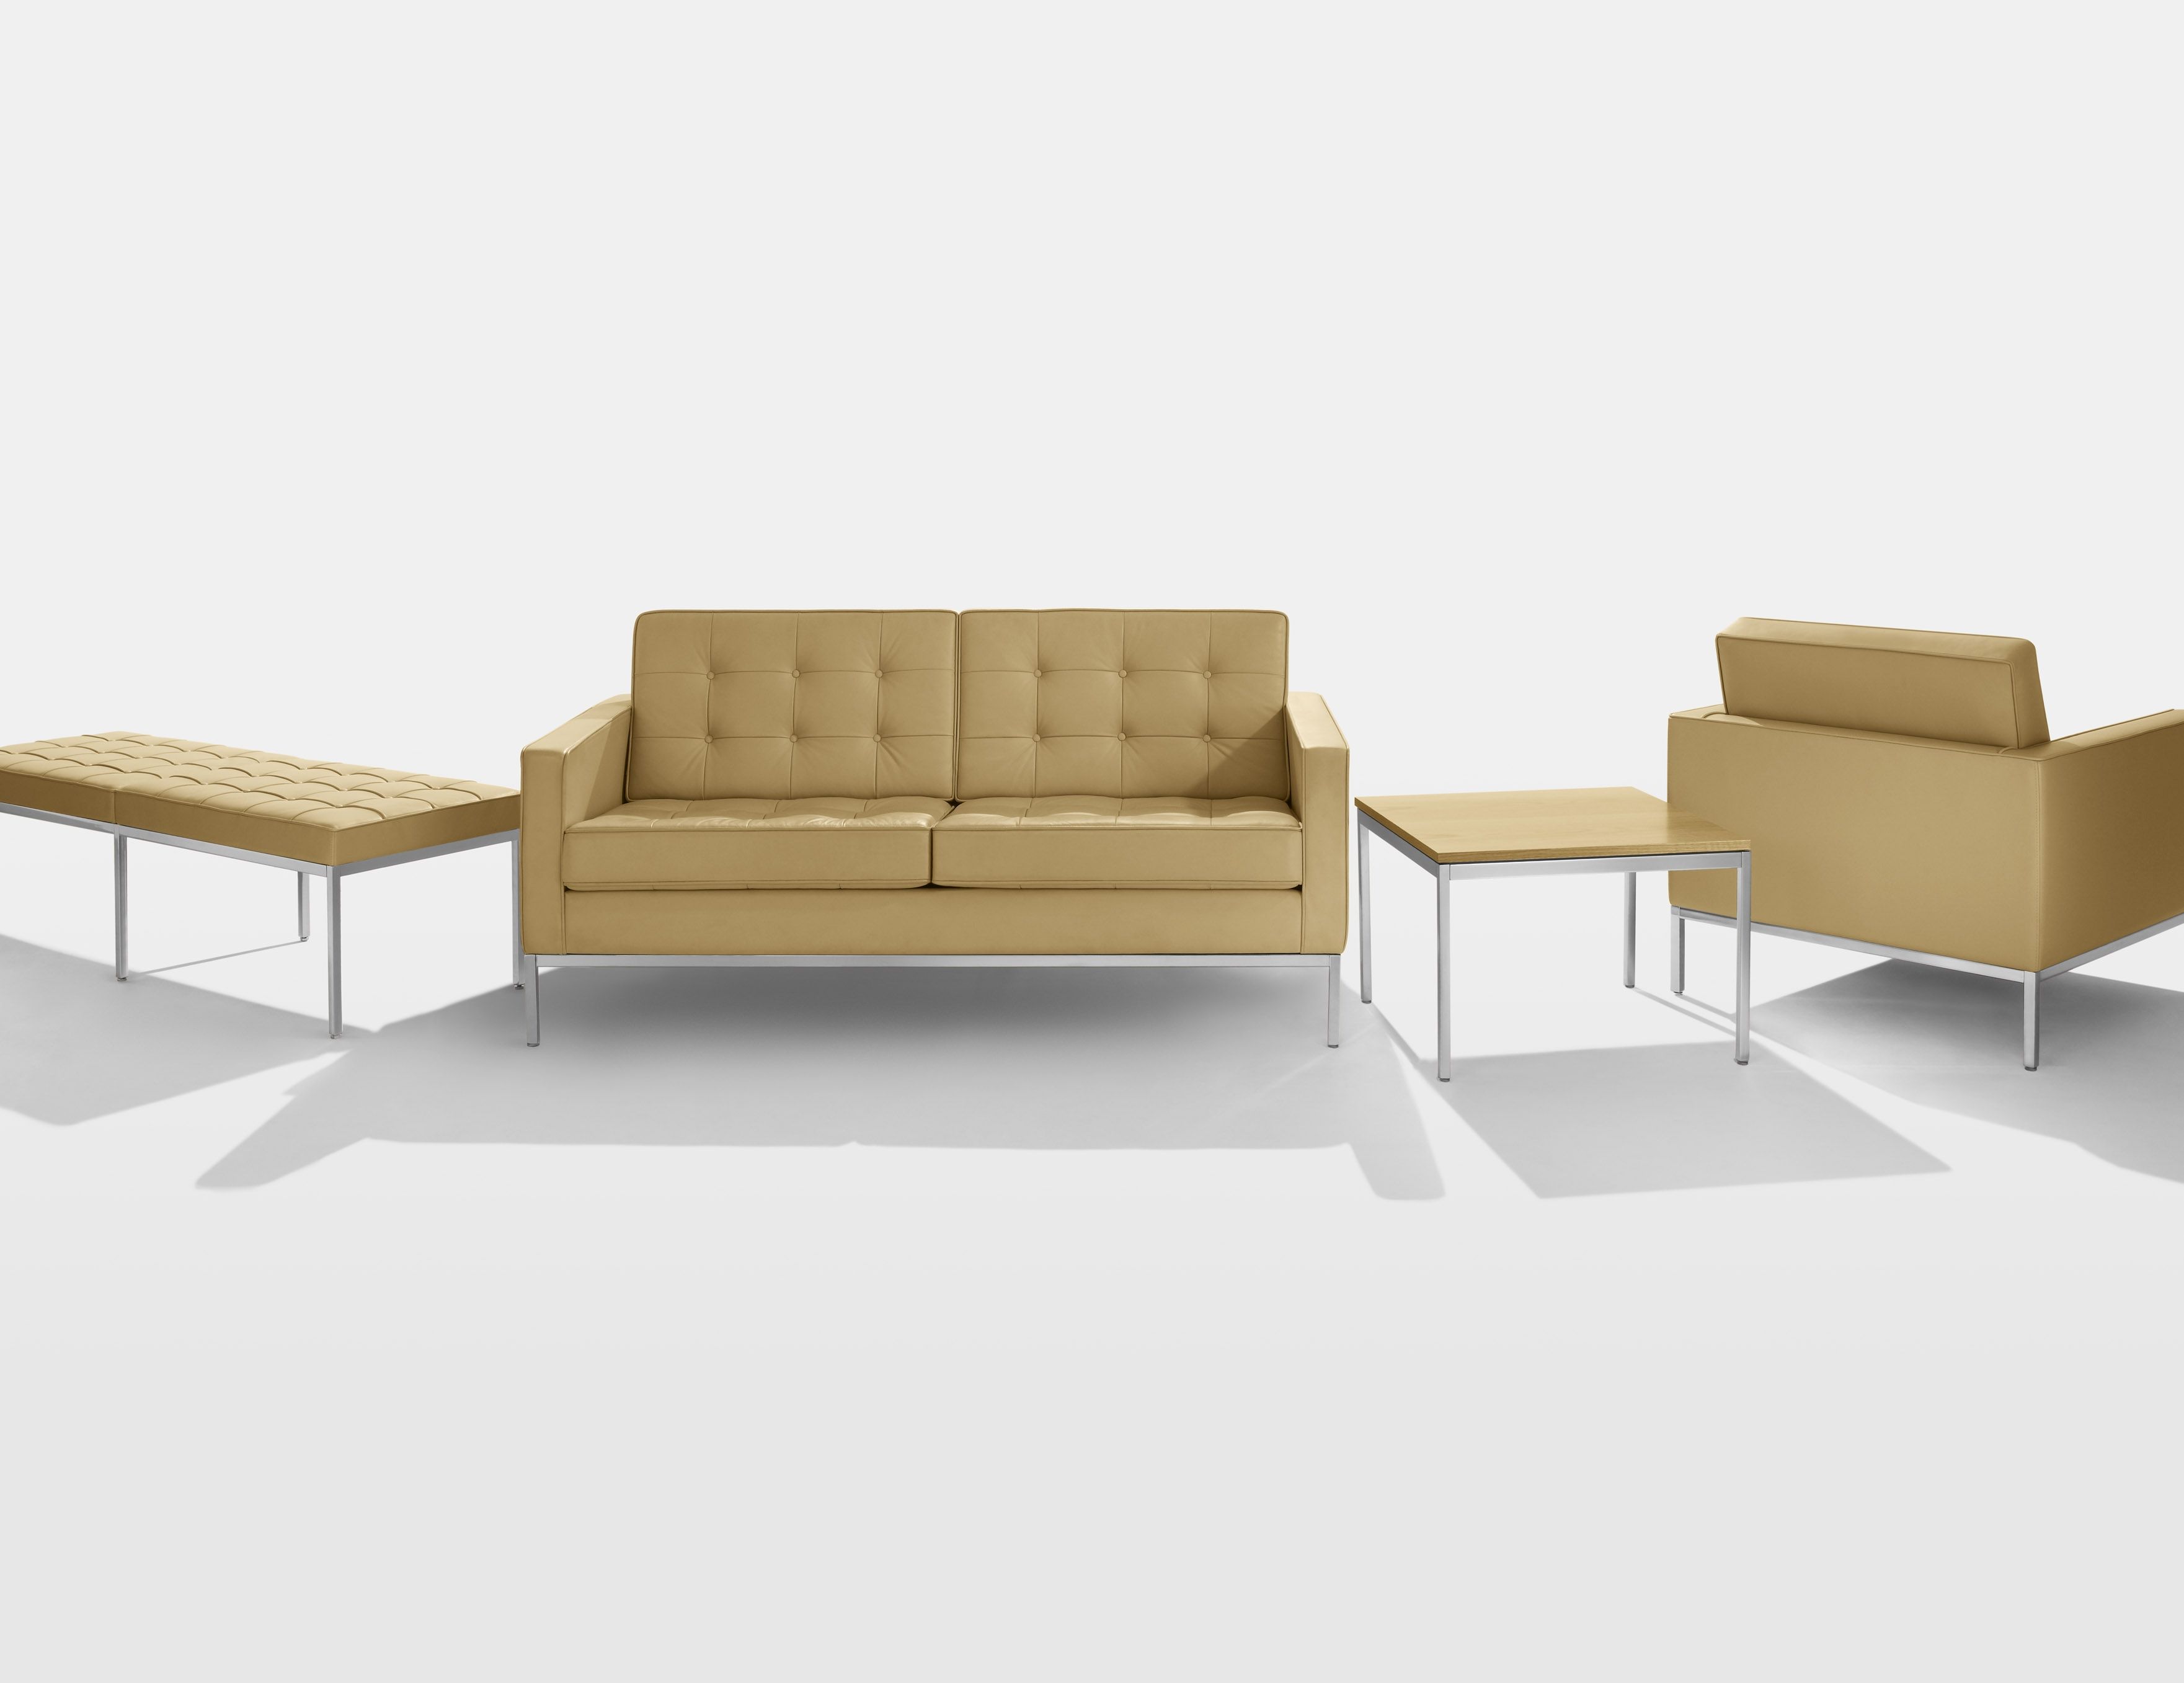 Design Classics 40 Florence Knoll Sofa Mad About The House With Regard To Florence Medium Sofas (View 15 of 15)